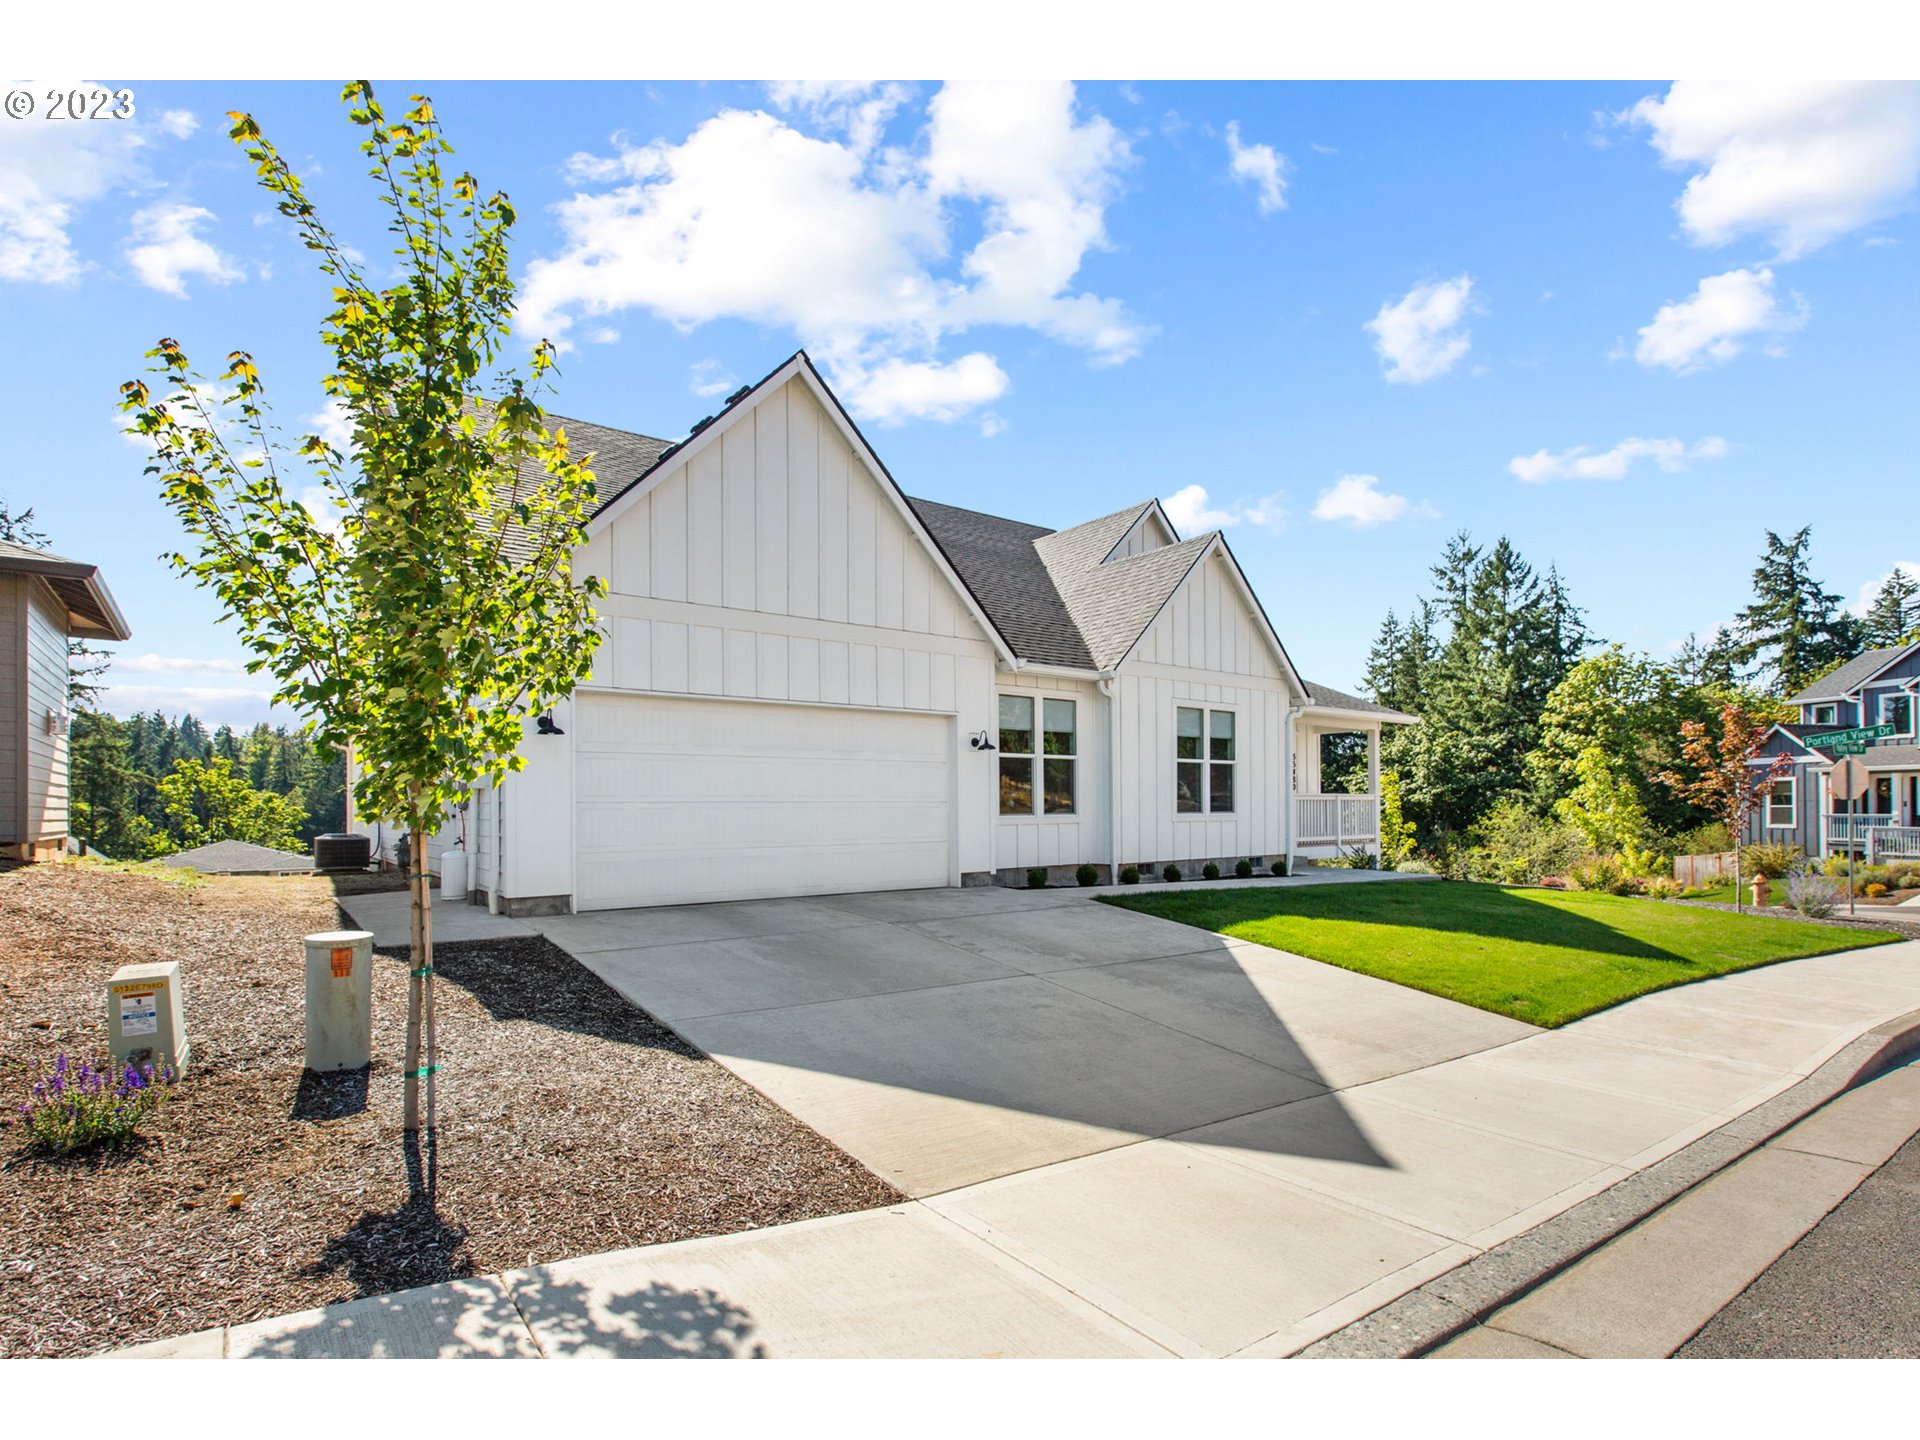 35480 VALLEY VIEW DR, St. Helens, OR 